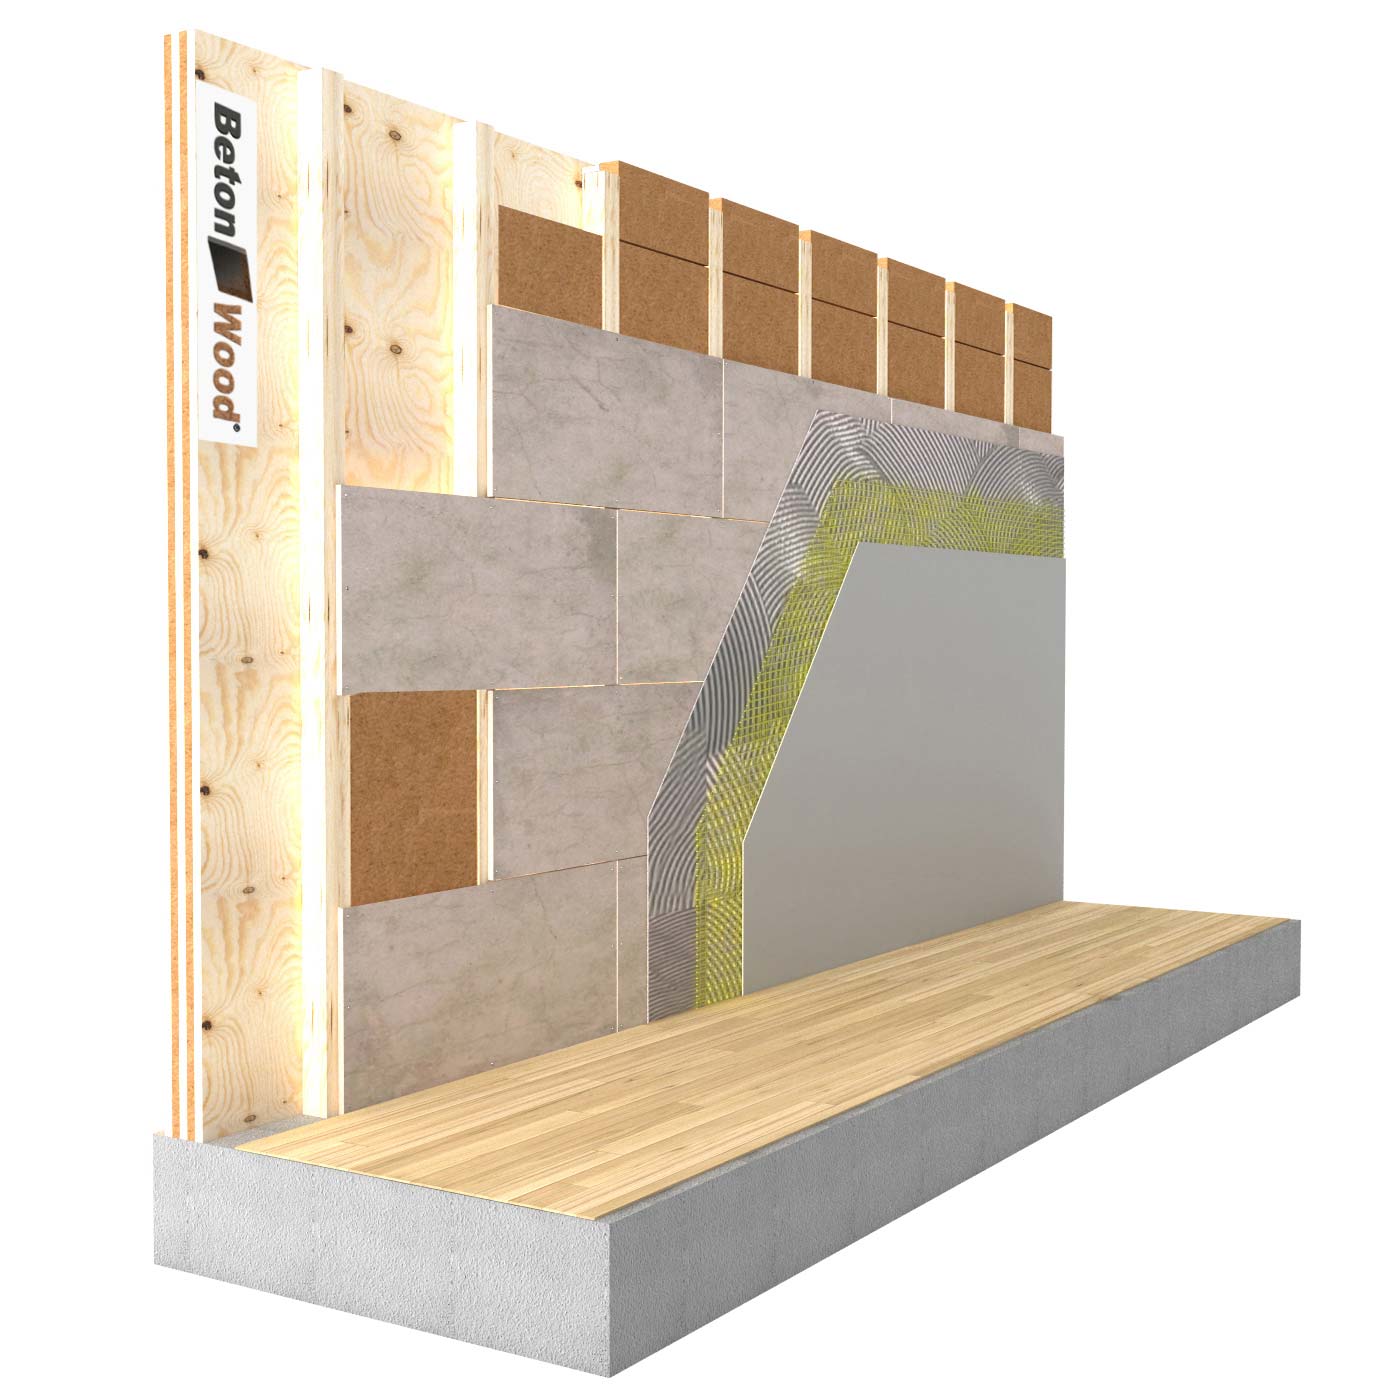 Internal insulation system in Protect Wood fibre board and cement bonded particle board